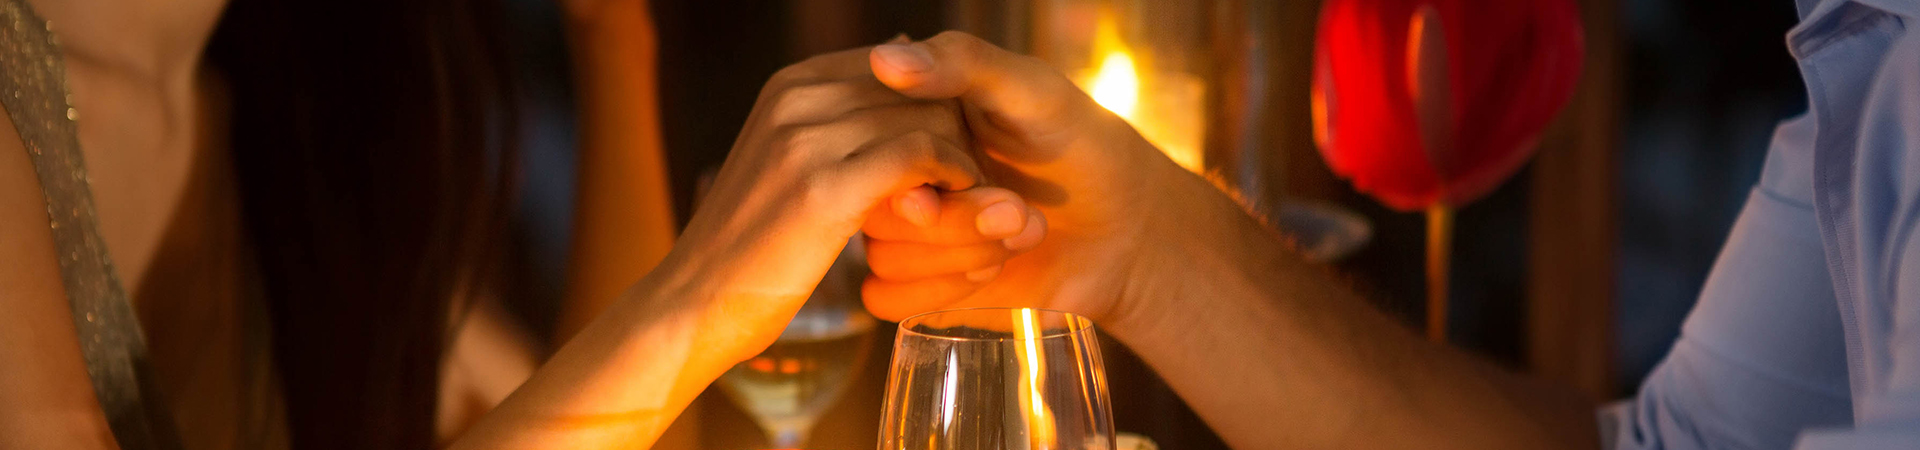 couple holding hands at a romantic dinner setting